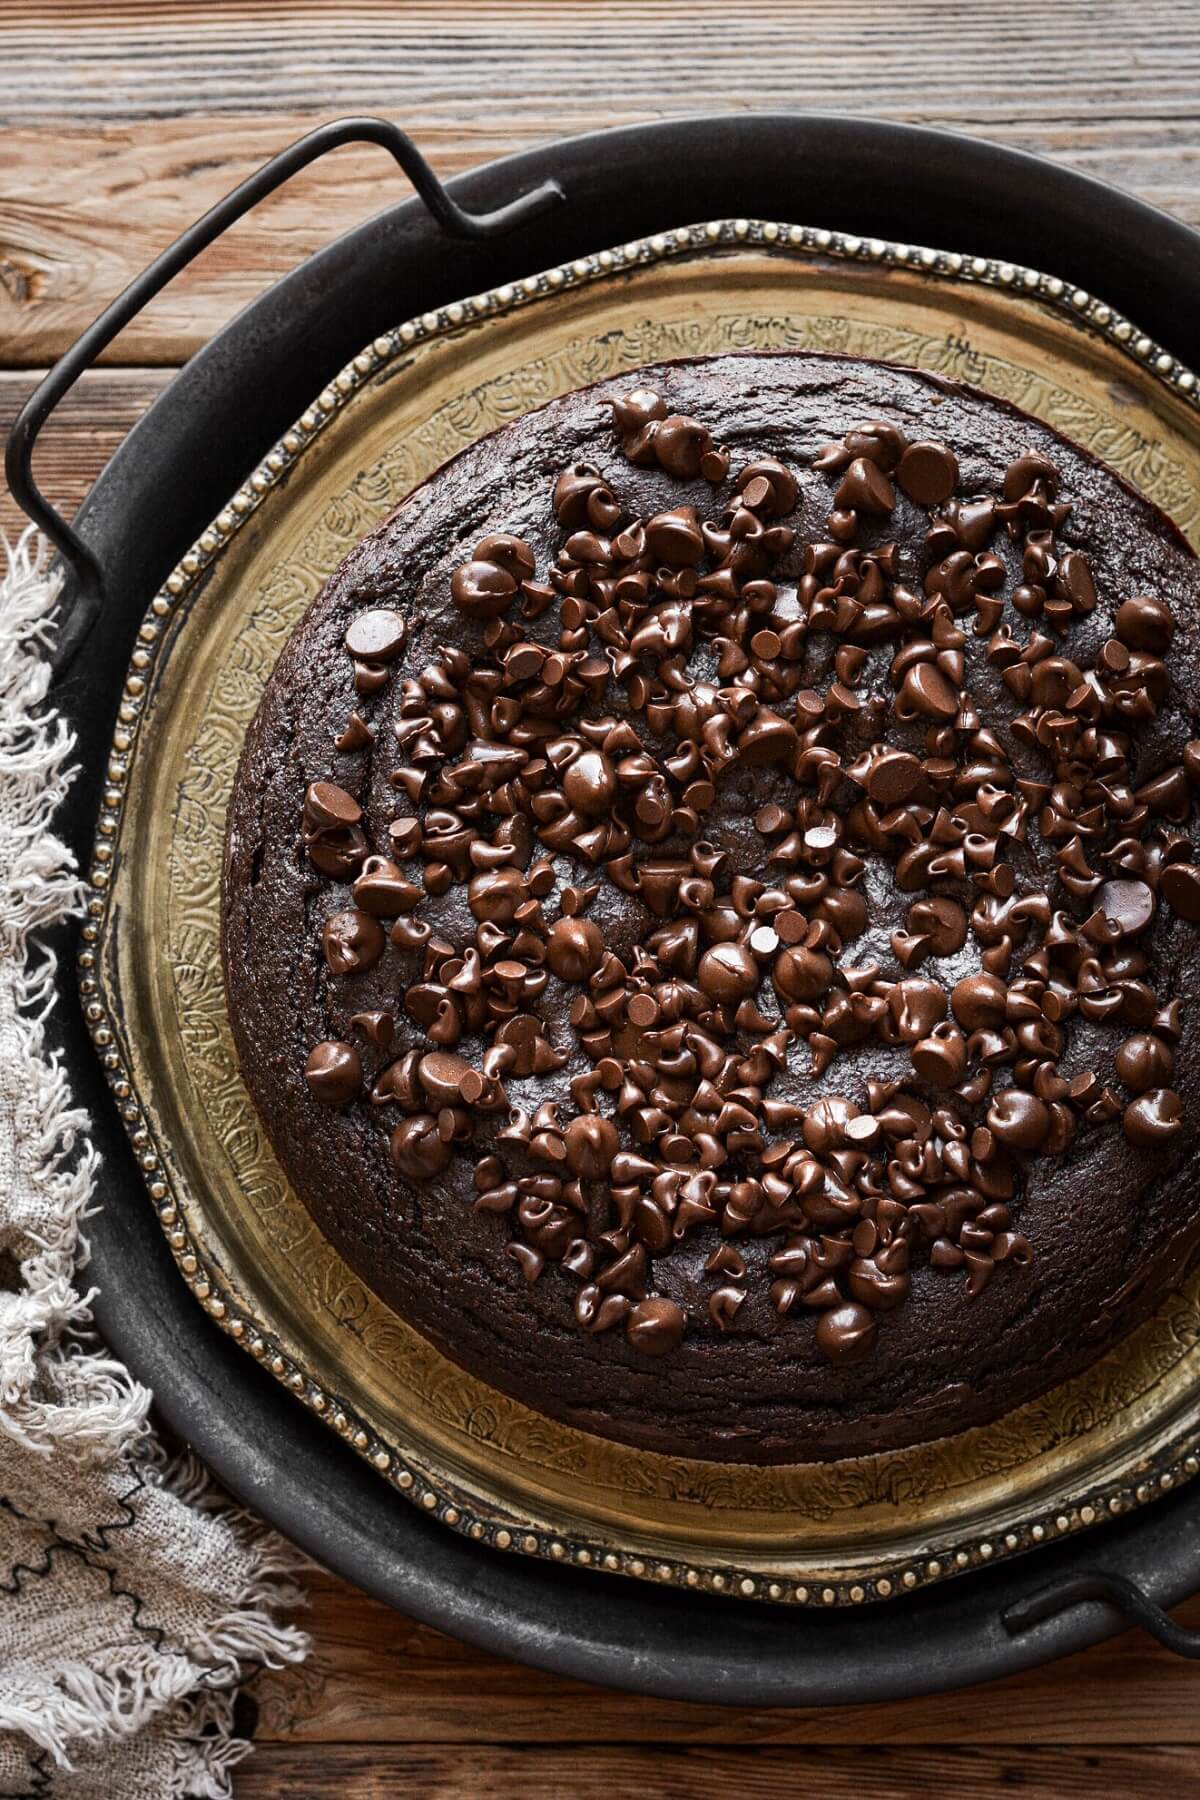 One layer chocolate ricotta cake sprinkled with chocolate chips.